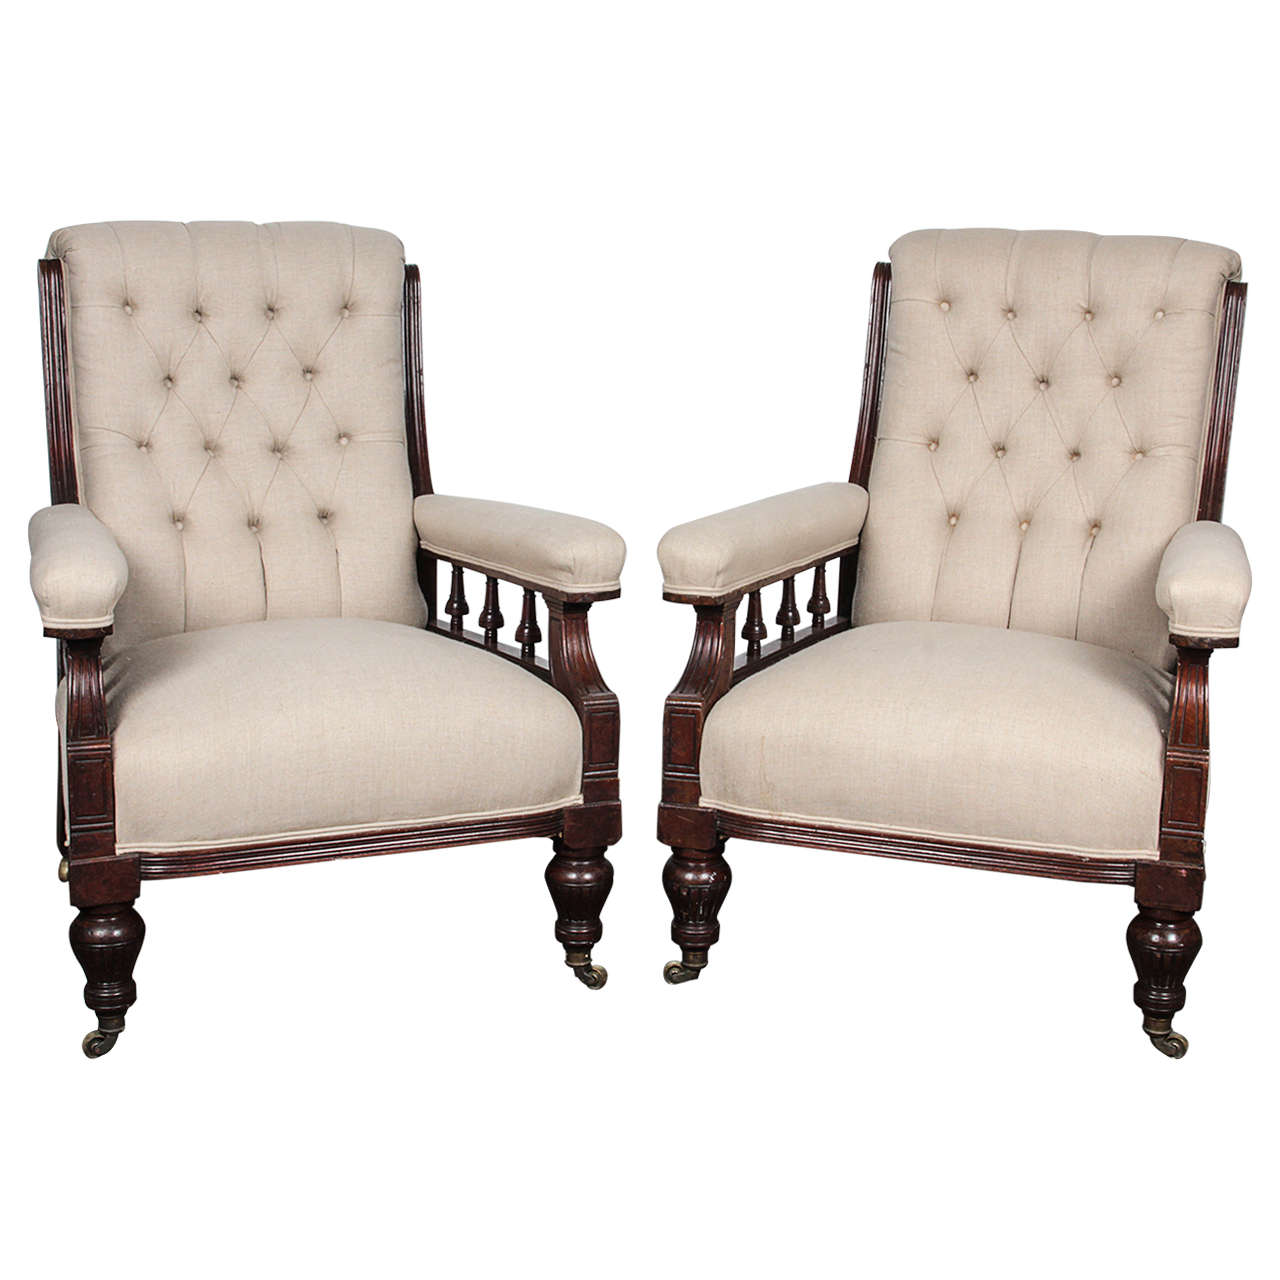 Pair of Victorian Mahogany and Button-Tufted Armchairs For Sale